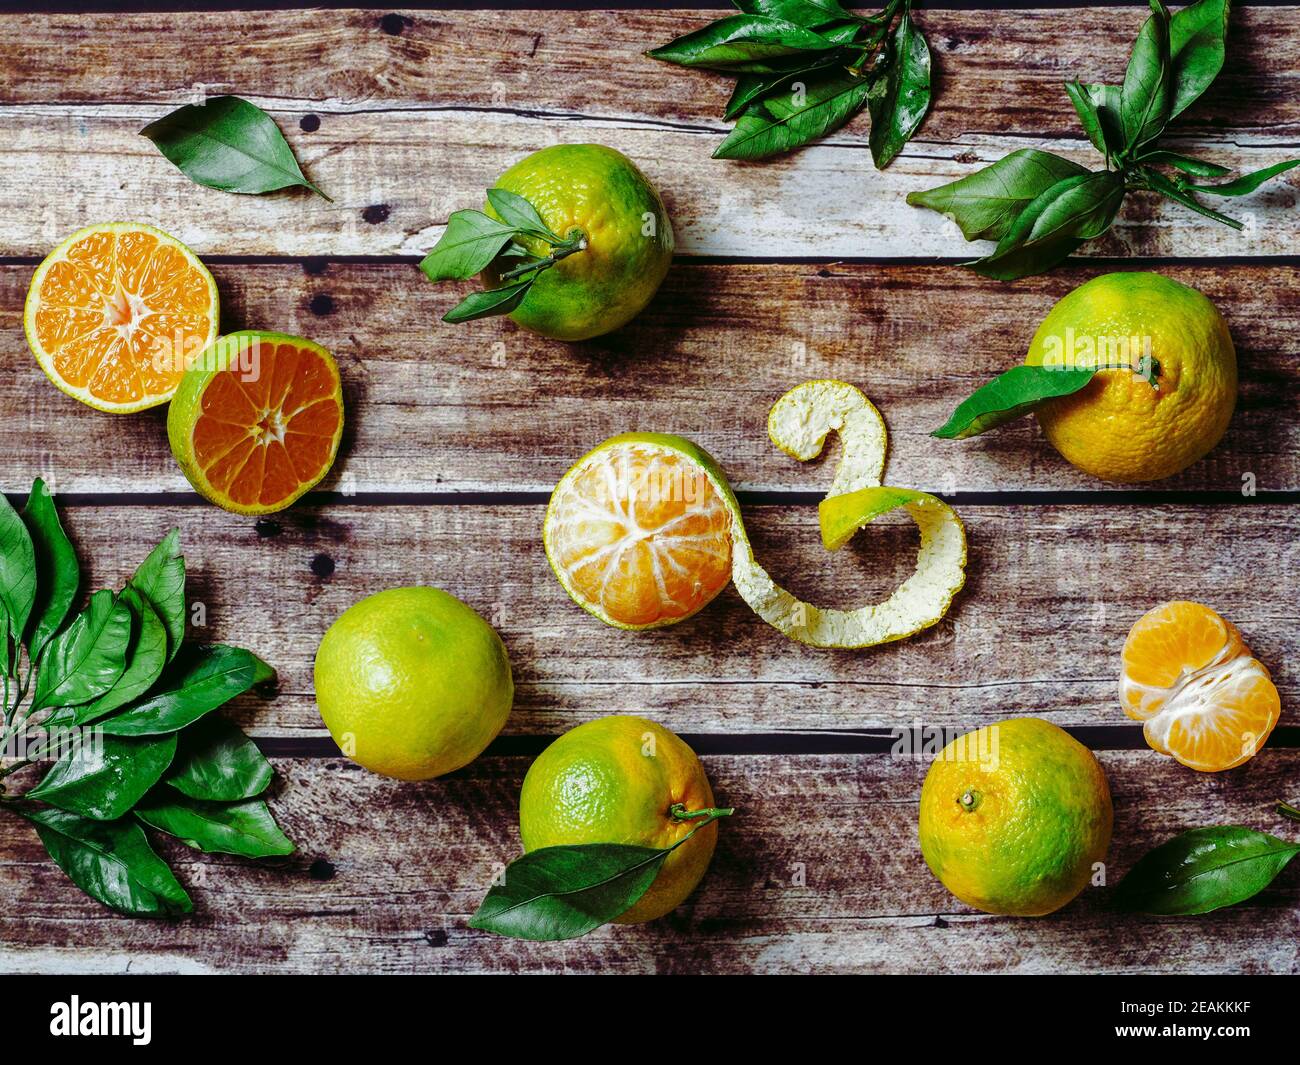 Green mandarins on wooden background, top view Stock Photo